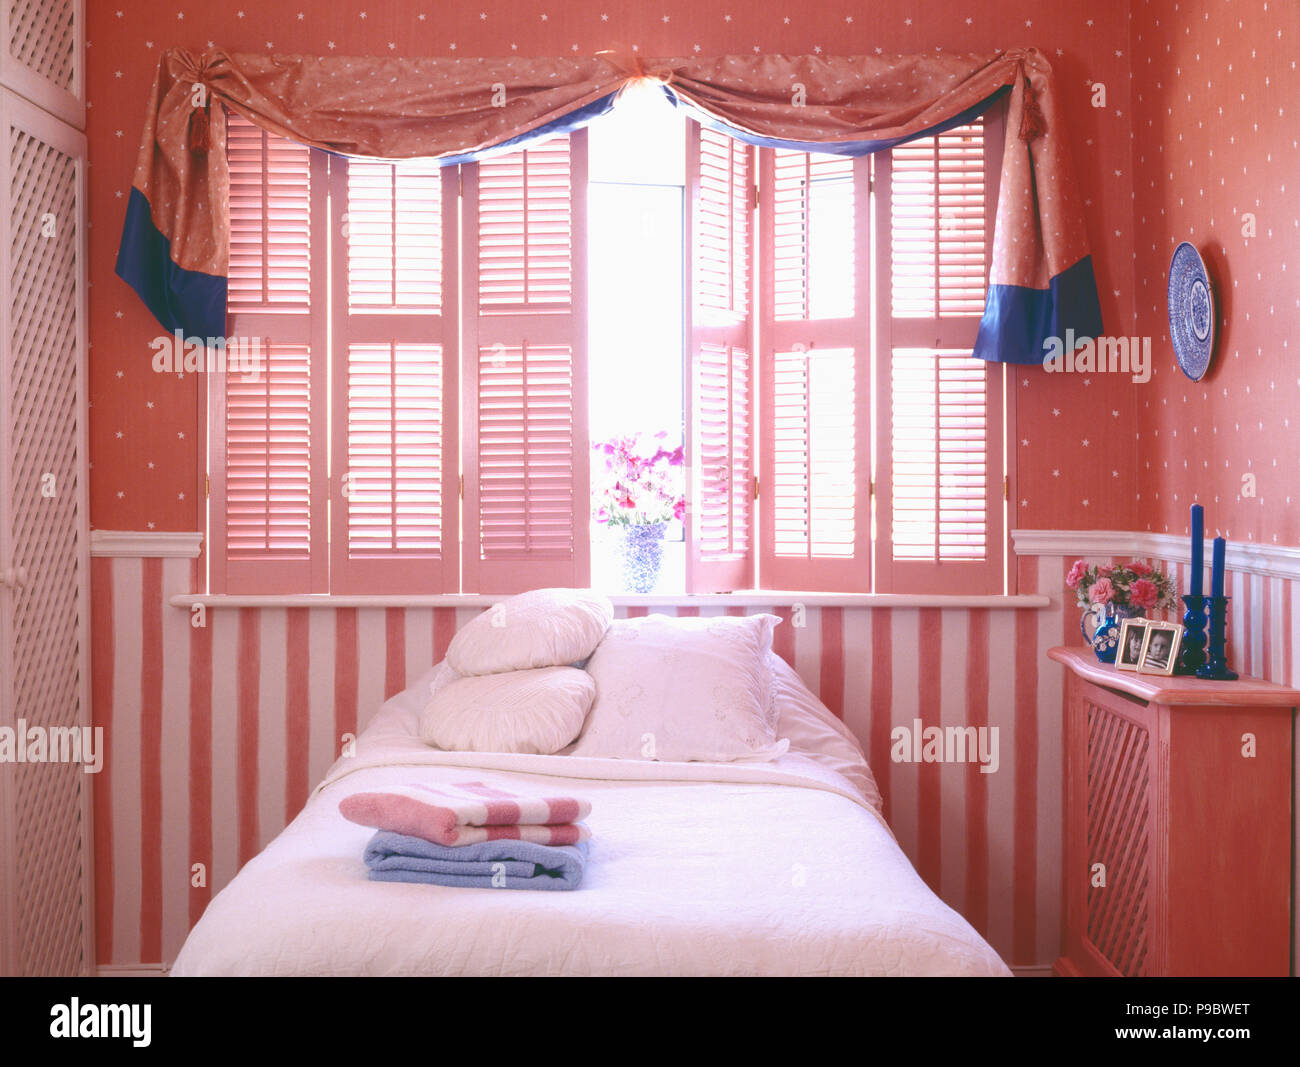 Draped pink fabric over plantation shutters in nineties bedroom with pink striped and spotted wallpaper Stock Photo